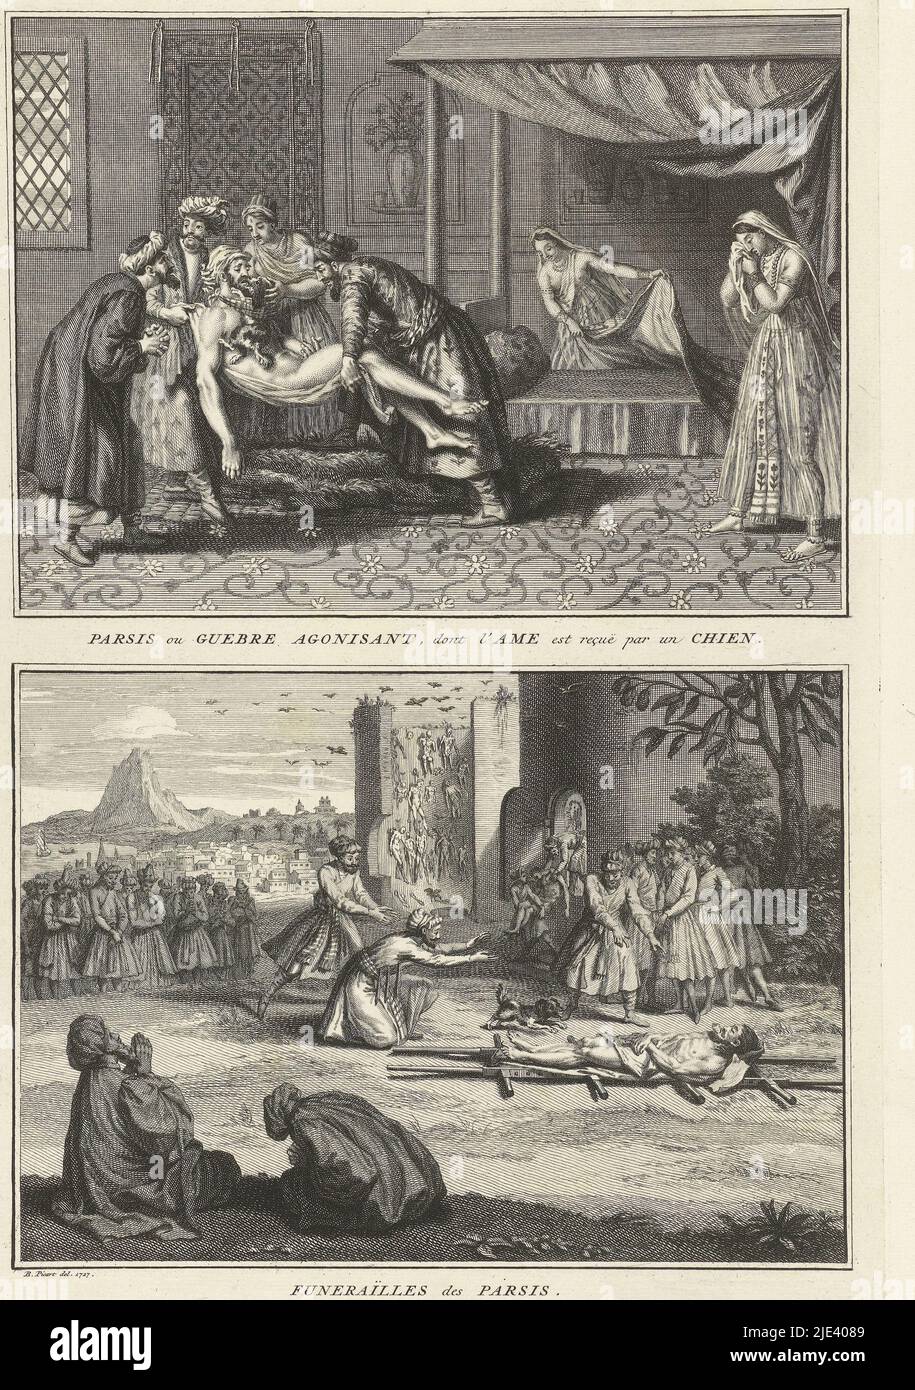 Persian funeral rites, Bernard Picart (workshop of), after Bernard Picart, 1727, Sheet with two representations of Persian funeral rites. Top: A dog is tied around the body of a dying man to receive his soul. Below: The corpse lies on a bier, prey to birds. A dog is lured to the dead man. It is an auspicious omen when the dog eats the piece of bread that has been put into the mouth of the deceased. Below the representations a caption in French., print maker: Bernard Picart, (workshop of), intermediary draughtsman: Bernard Picart, (mentioned on object), Amsterdam, 1727, paper, etching Stock Photo